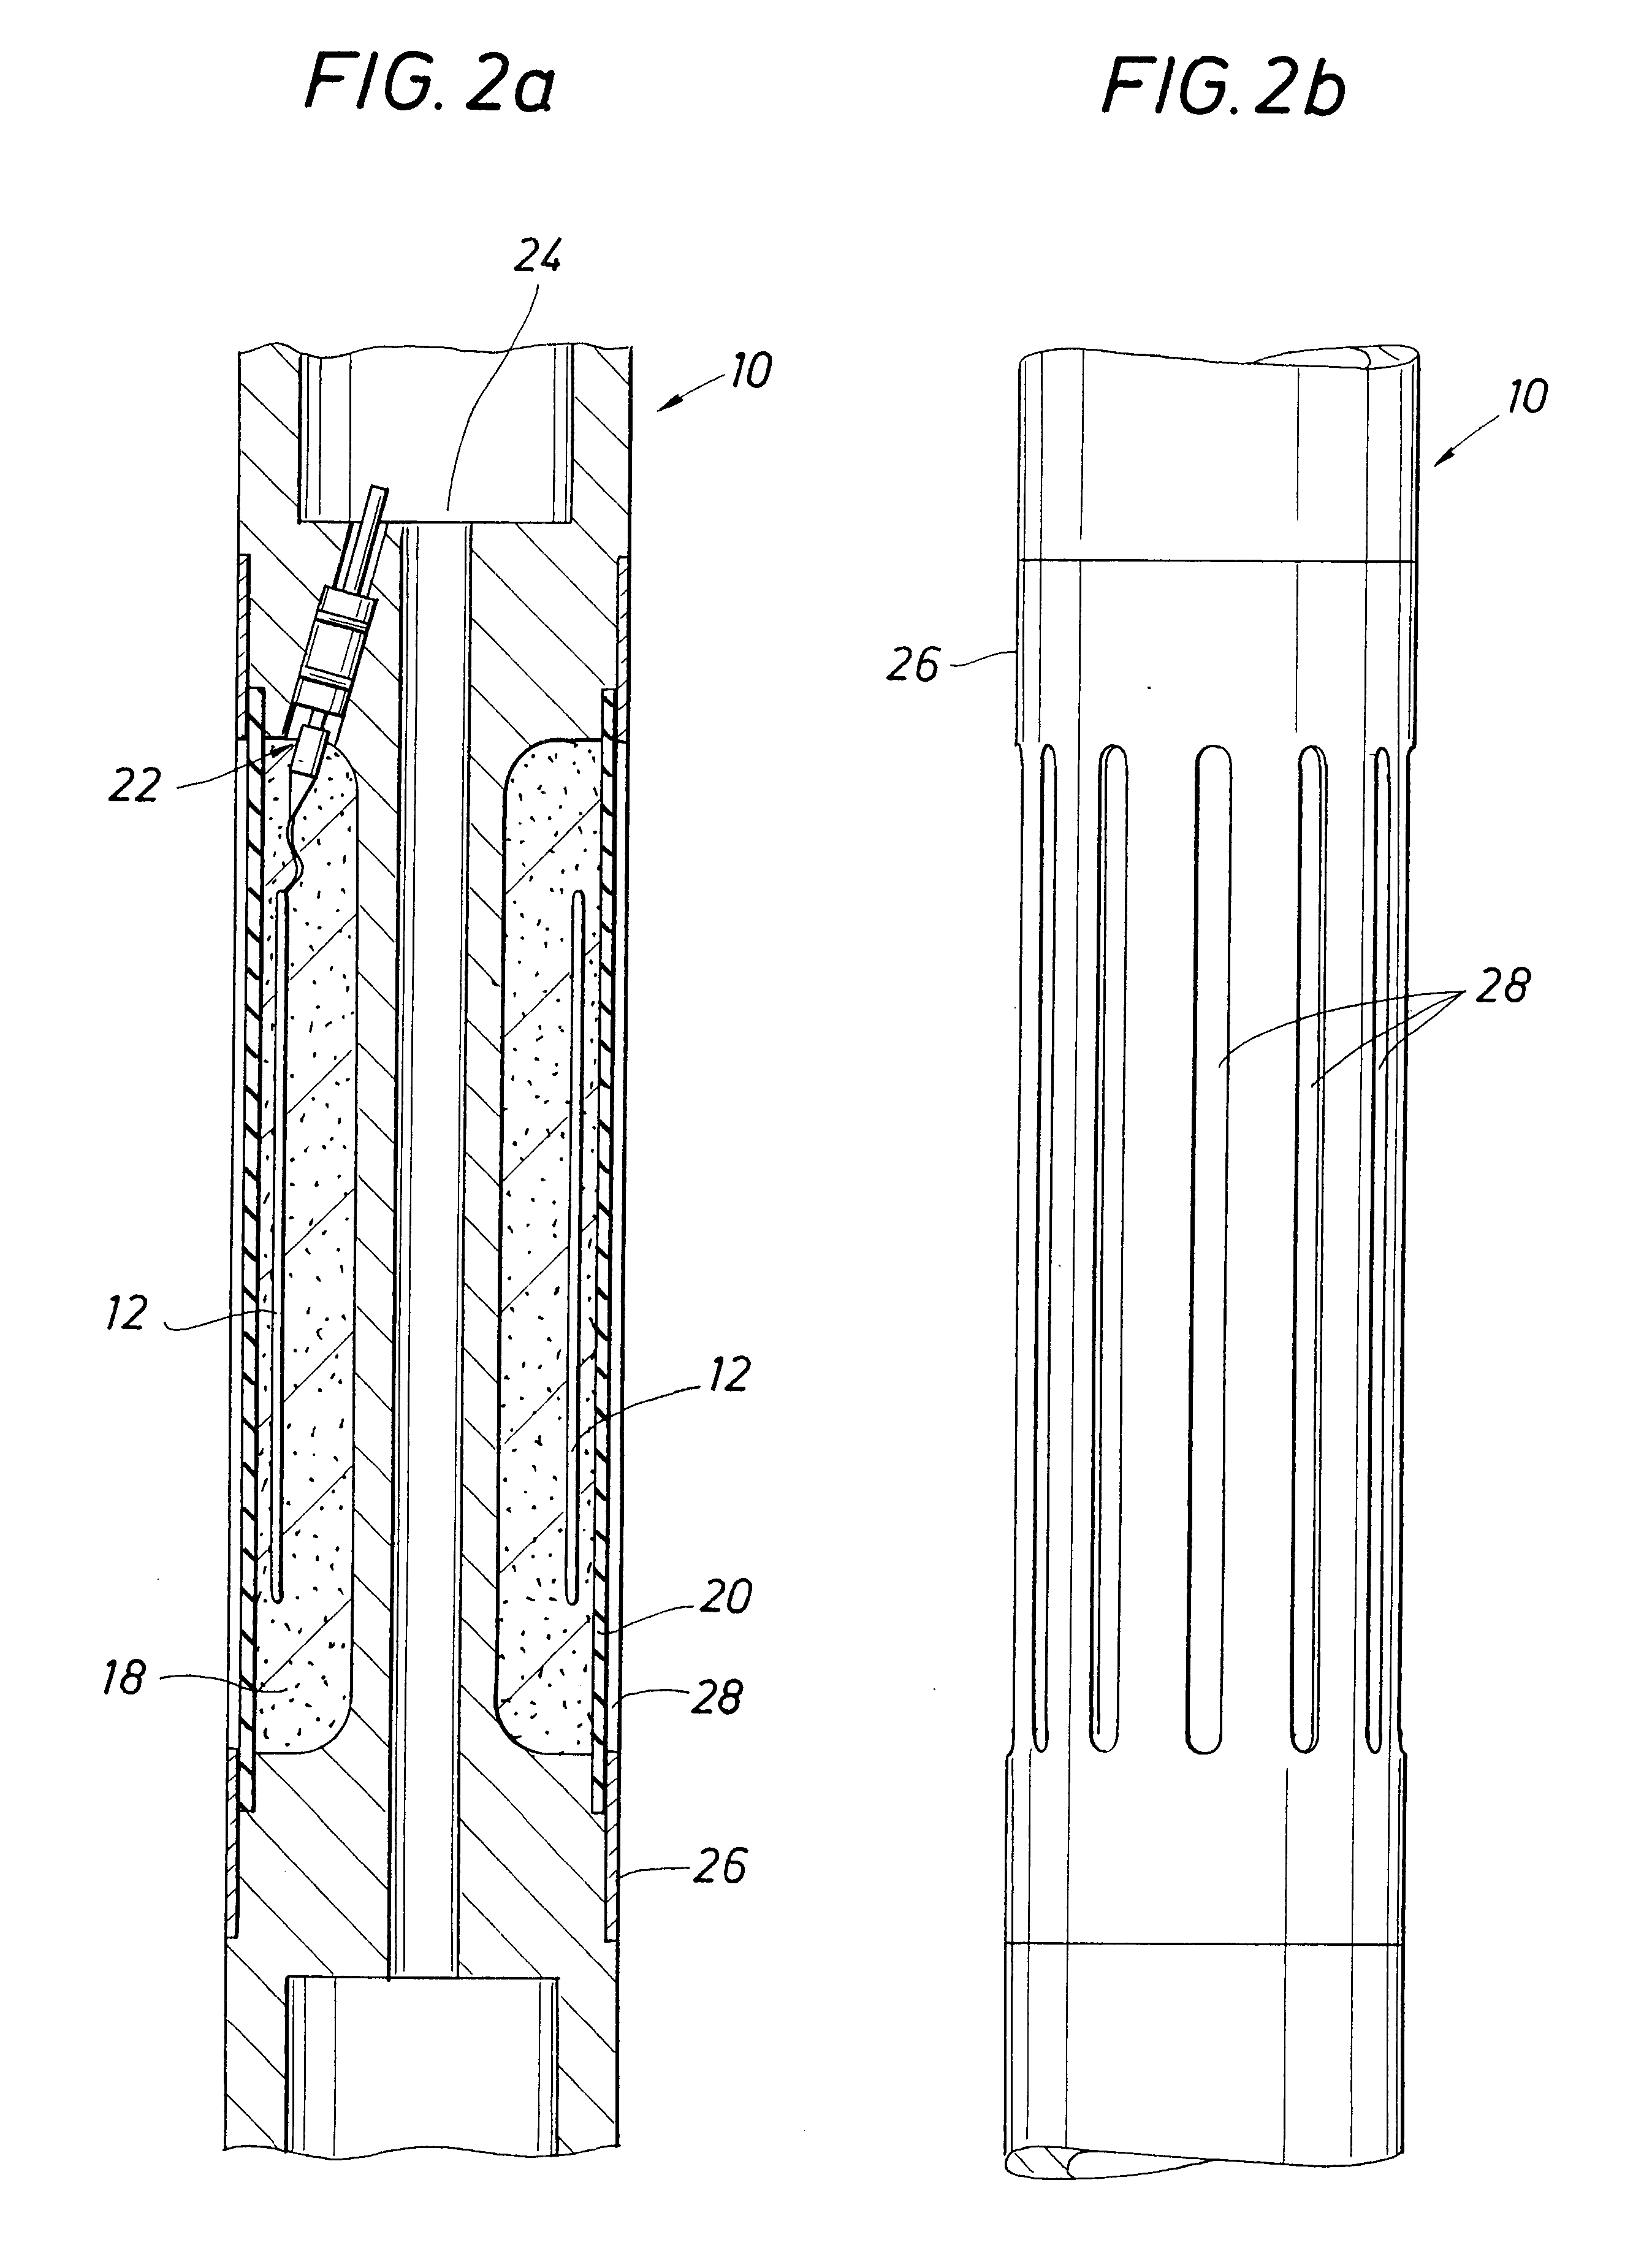 Method and apparatus for downhole signal communication and measurement through a metal tubular